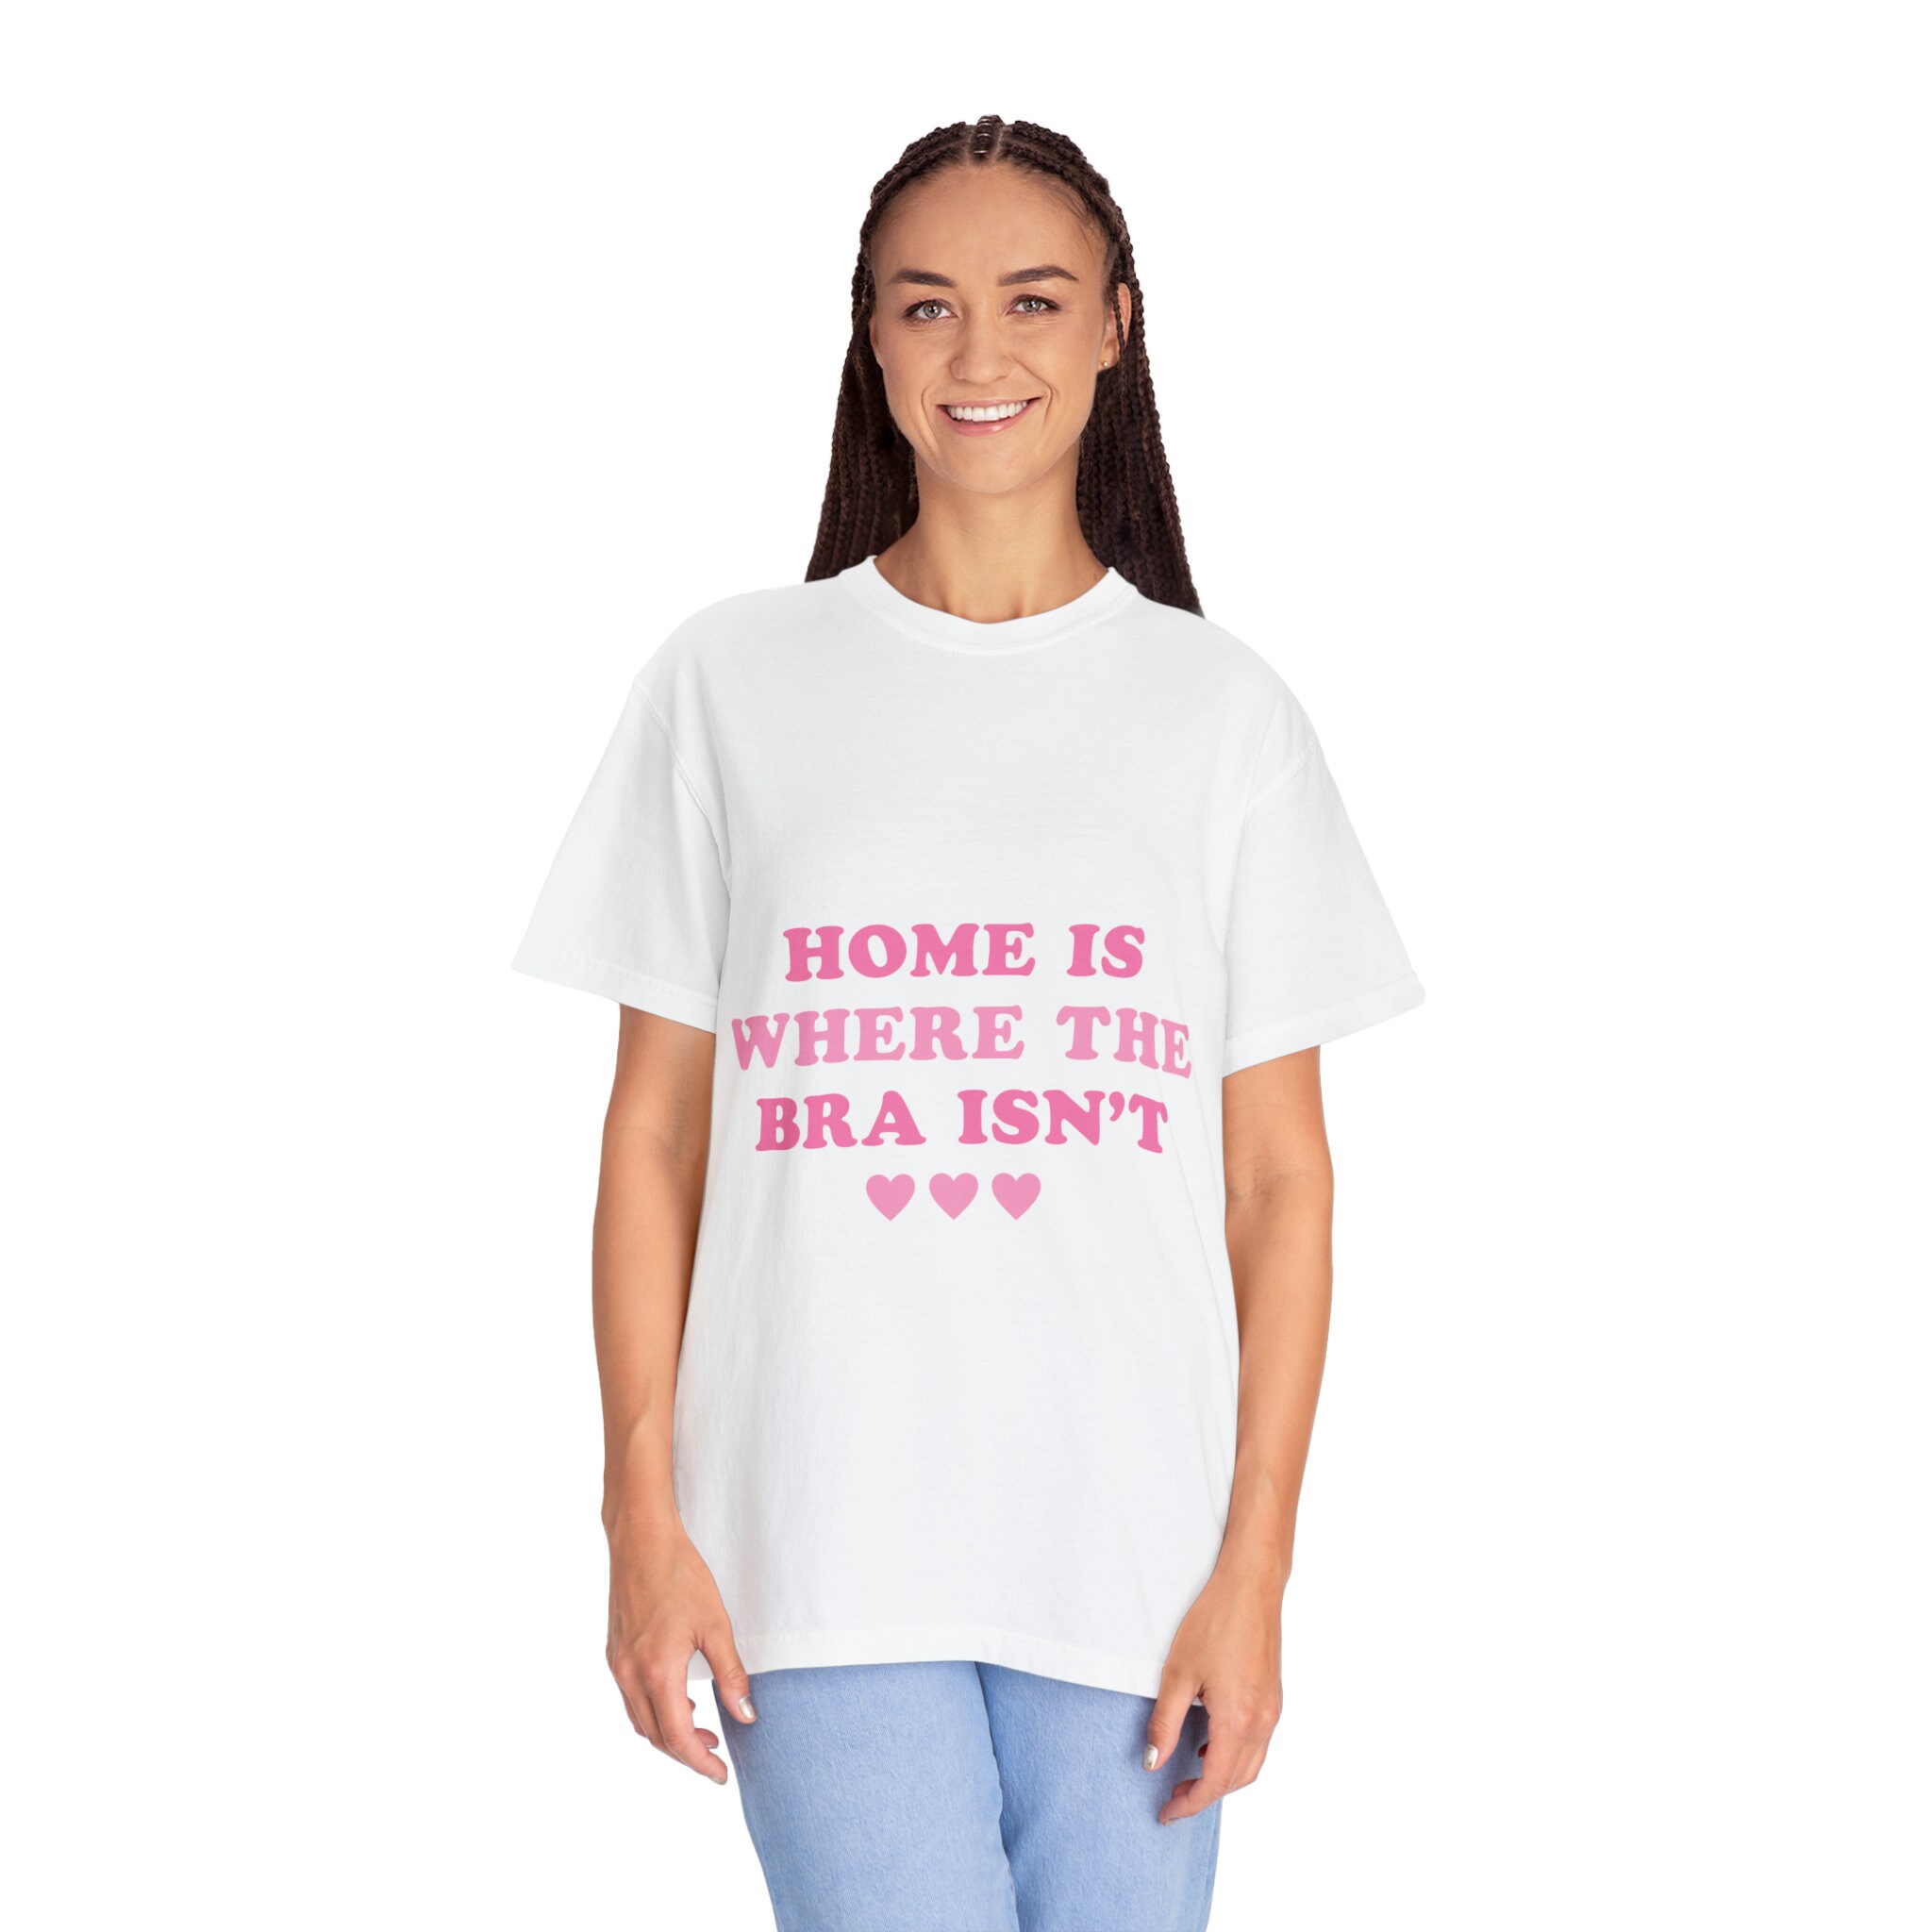 No Bra T-shirts Funny T Shirts for Women Instagram Shirts for Teens With  Sayings Graphic Tee Womens Tshirts 